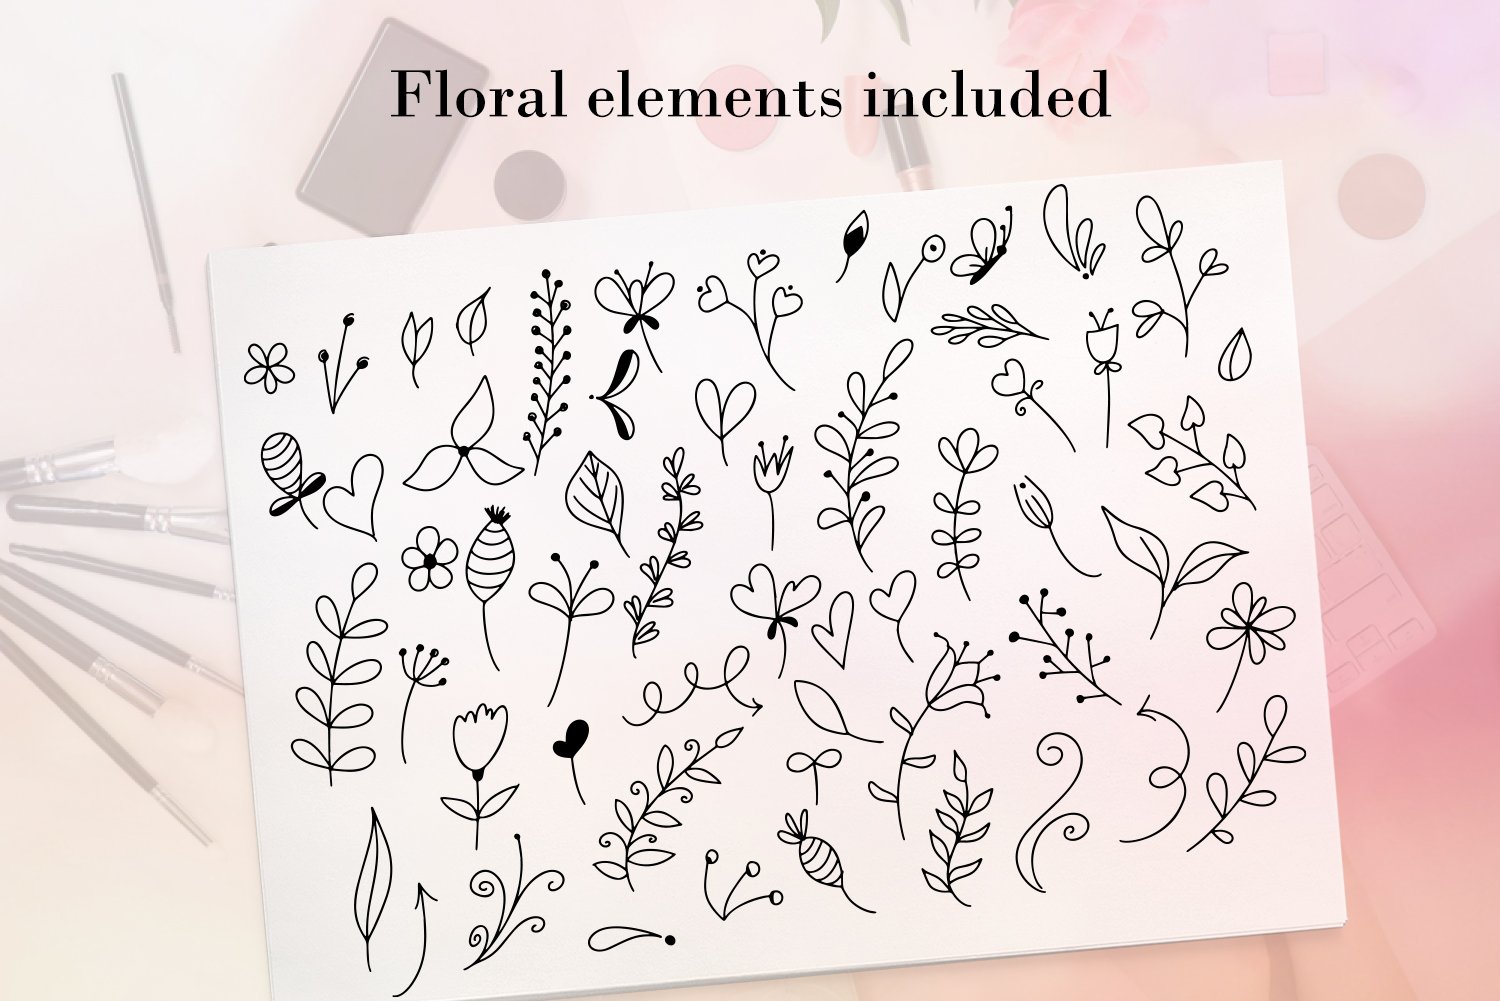 Floral elements for your wedding composition.